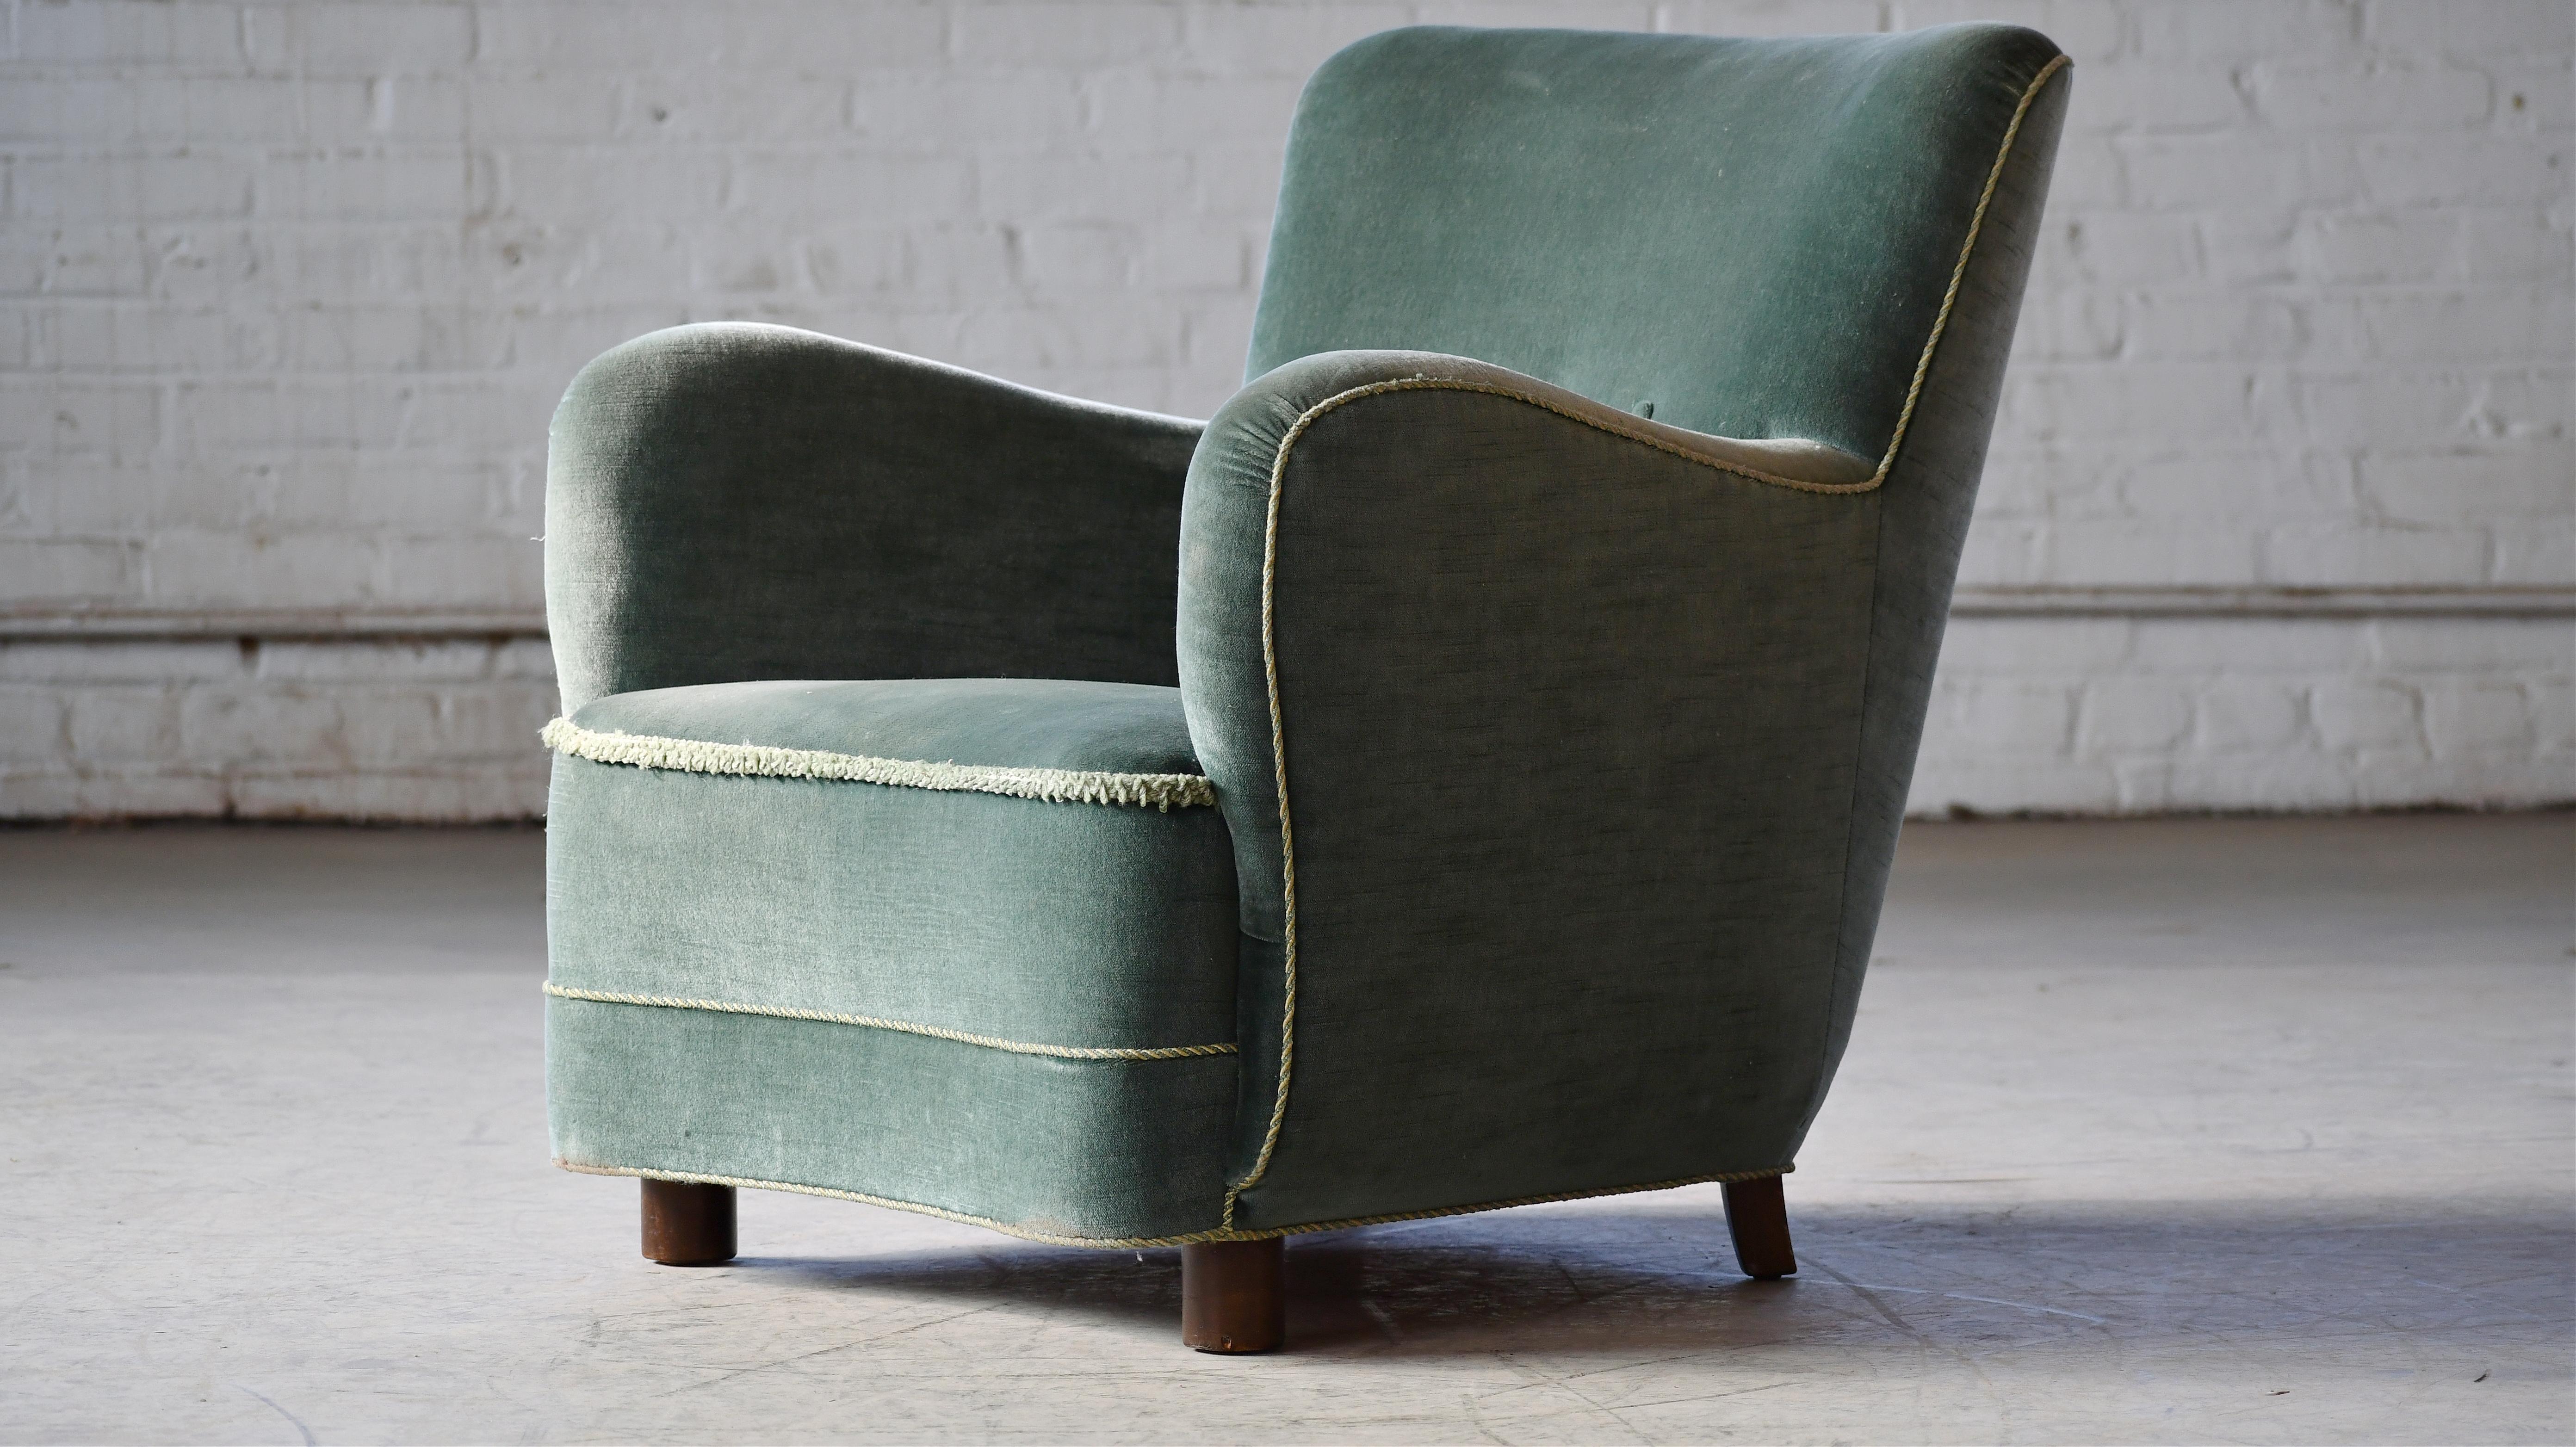 Mid-20th Century Danish Art Deco or Early Midcentury Lounge Chair in Green Mohair 1930-40s For Sale